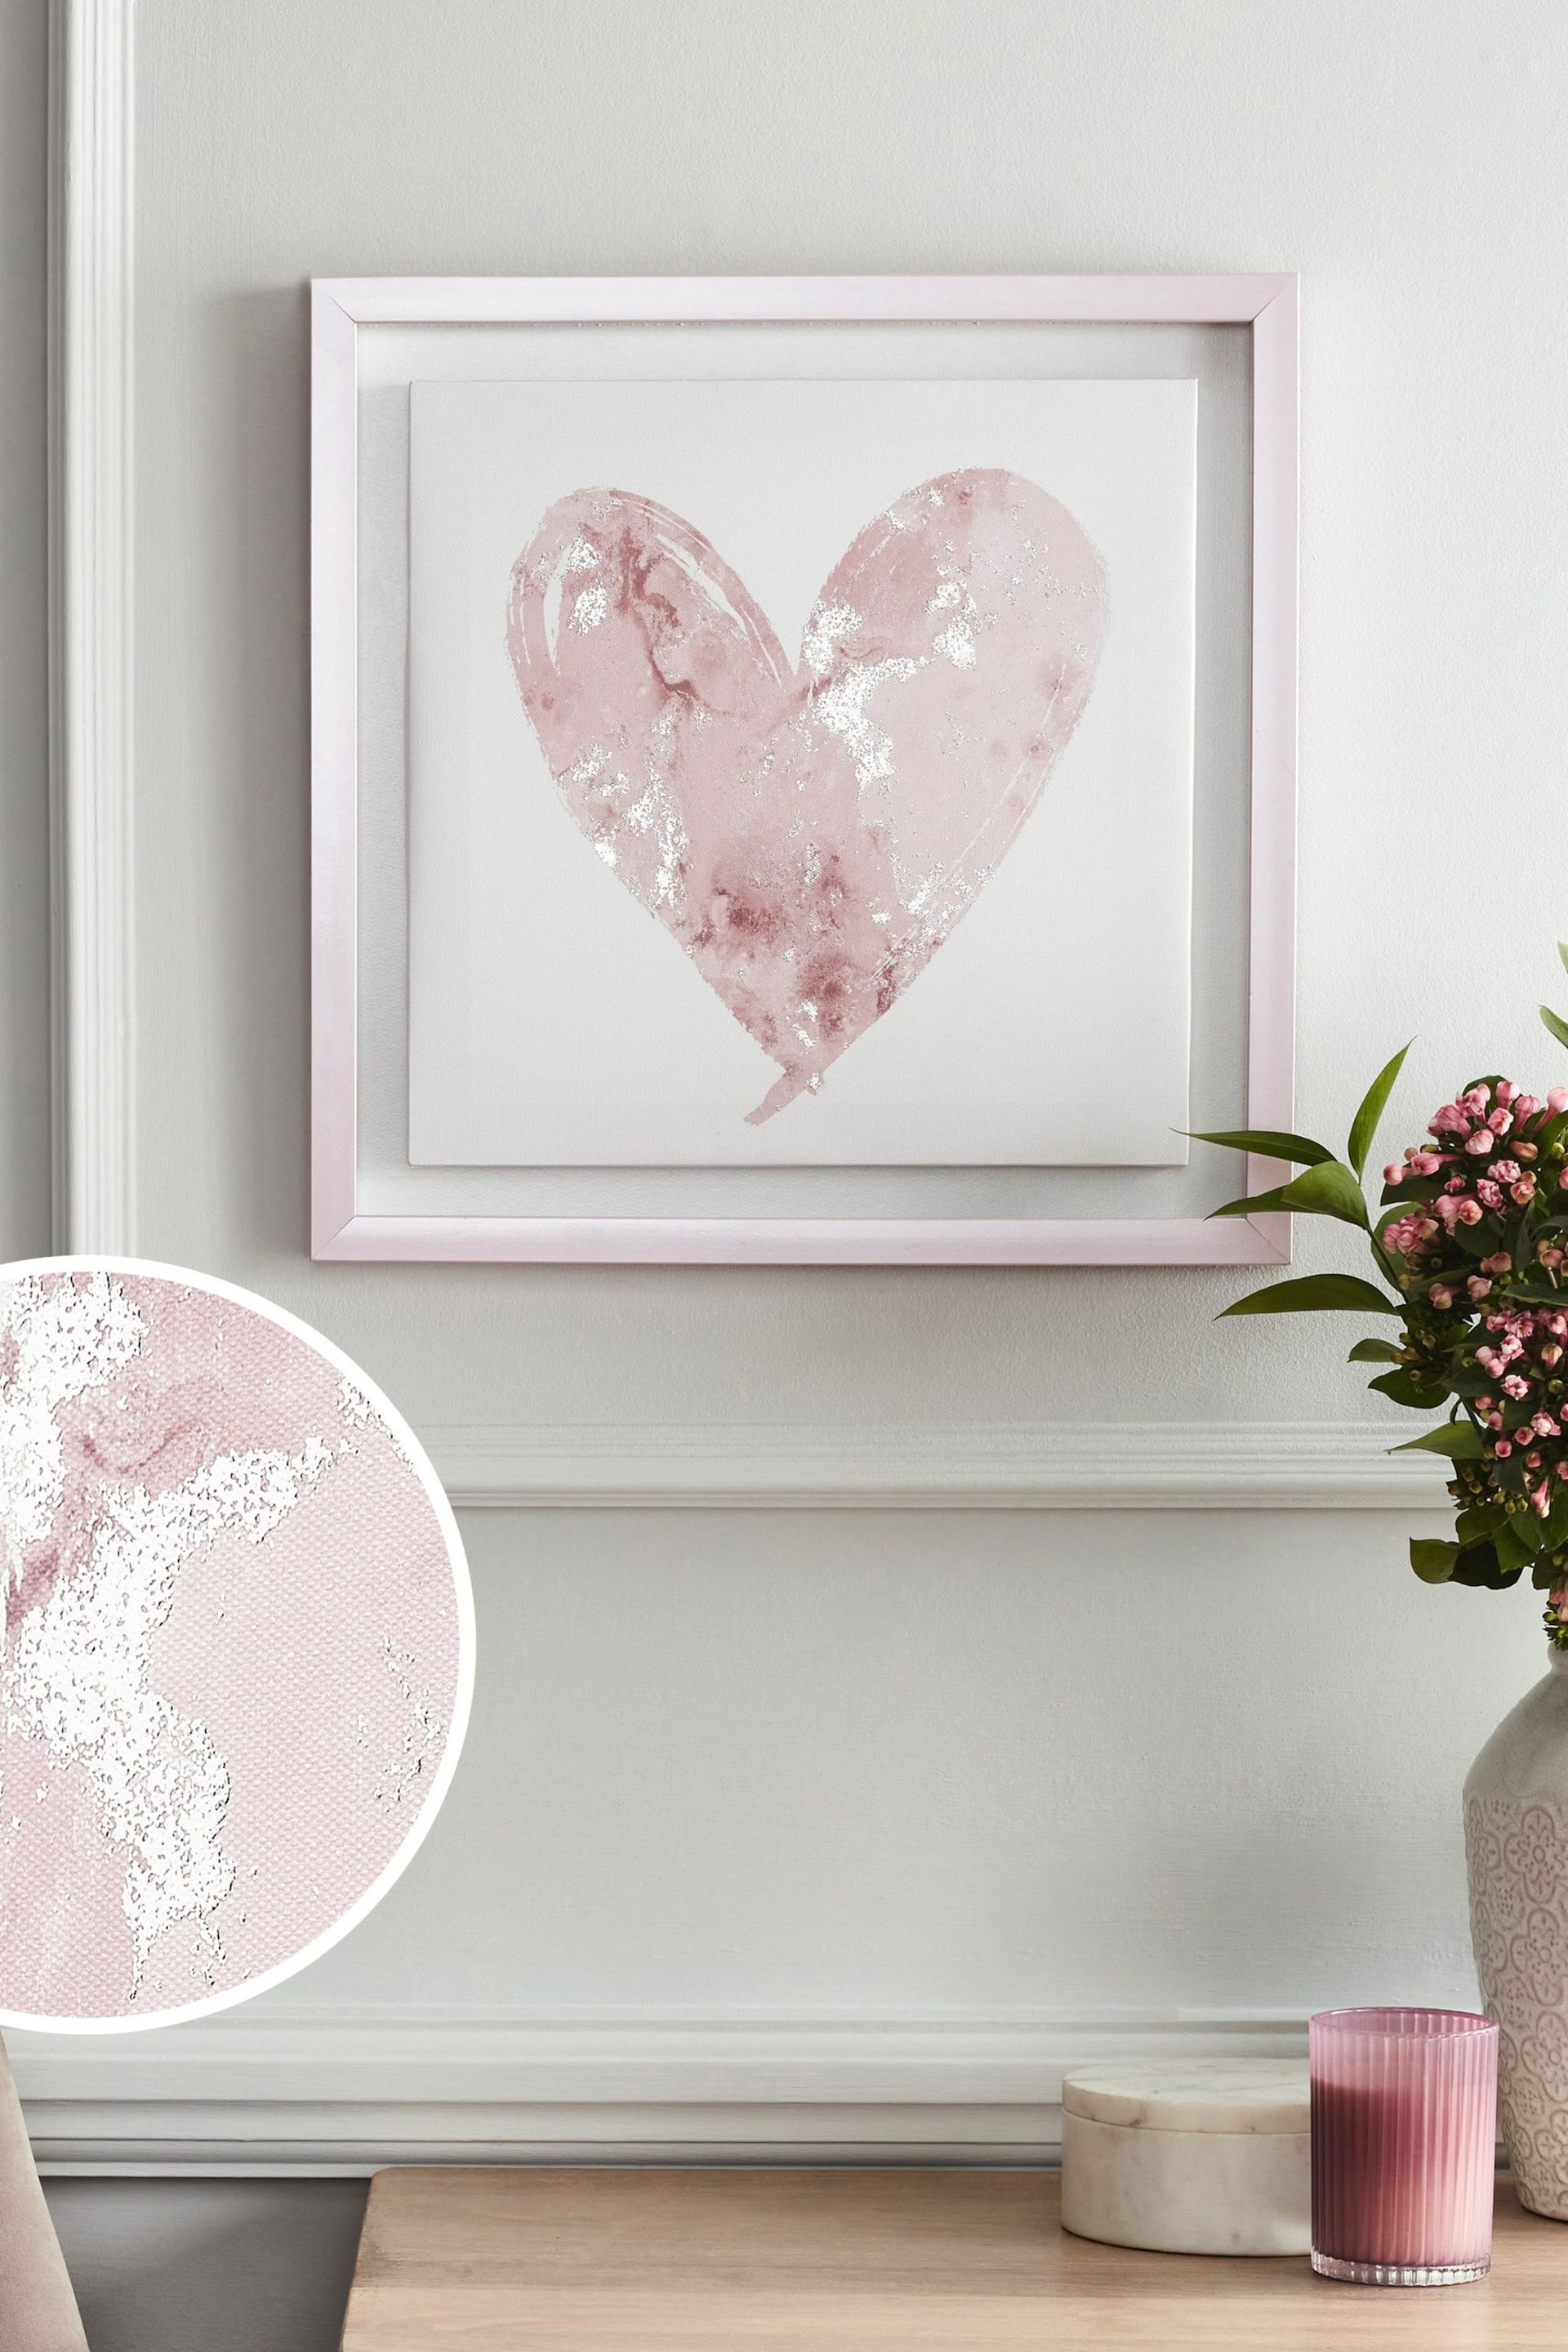 Pink Heart Framed Canvas Wall Art - Image 2 of 5